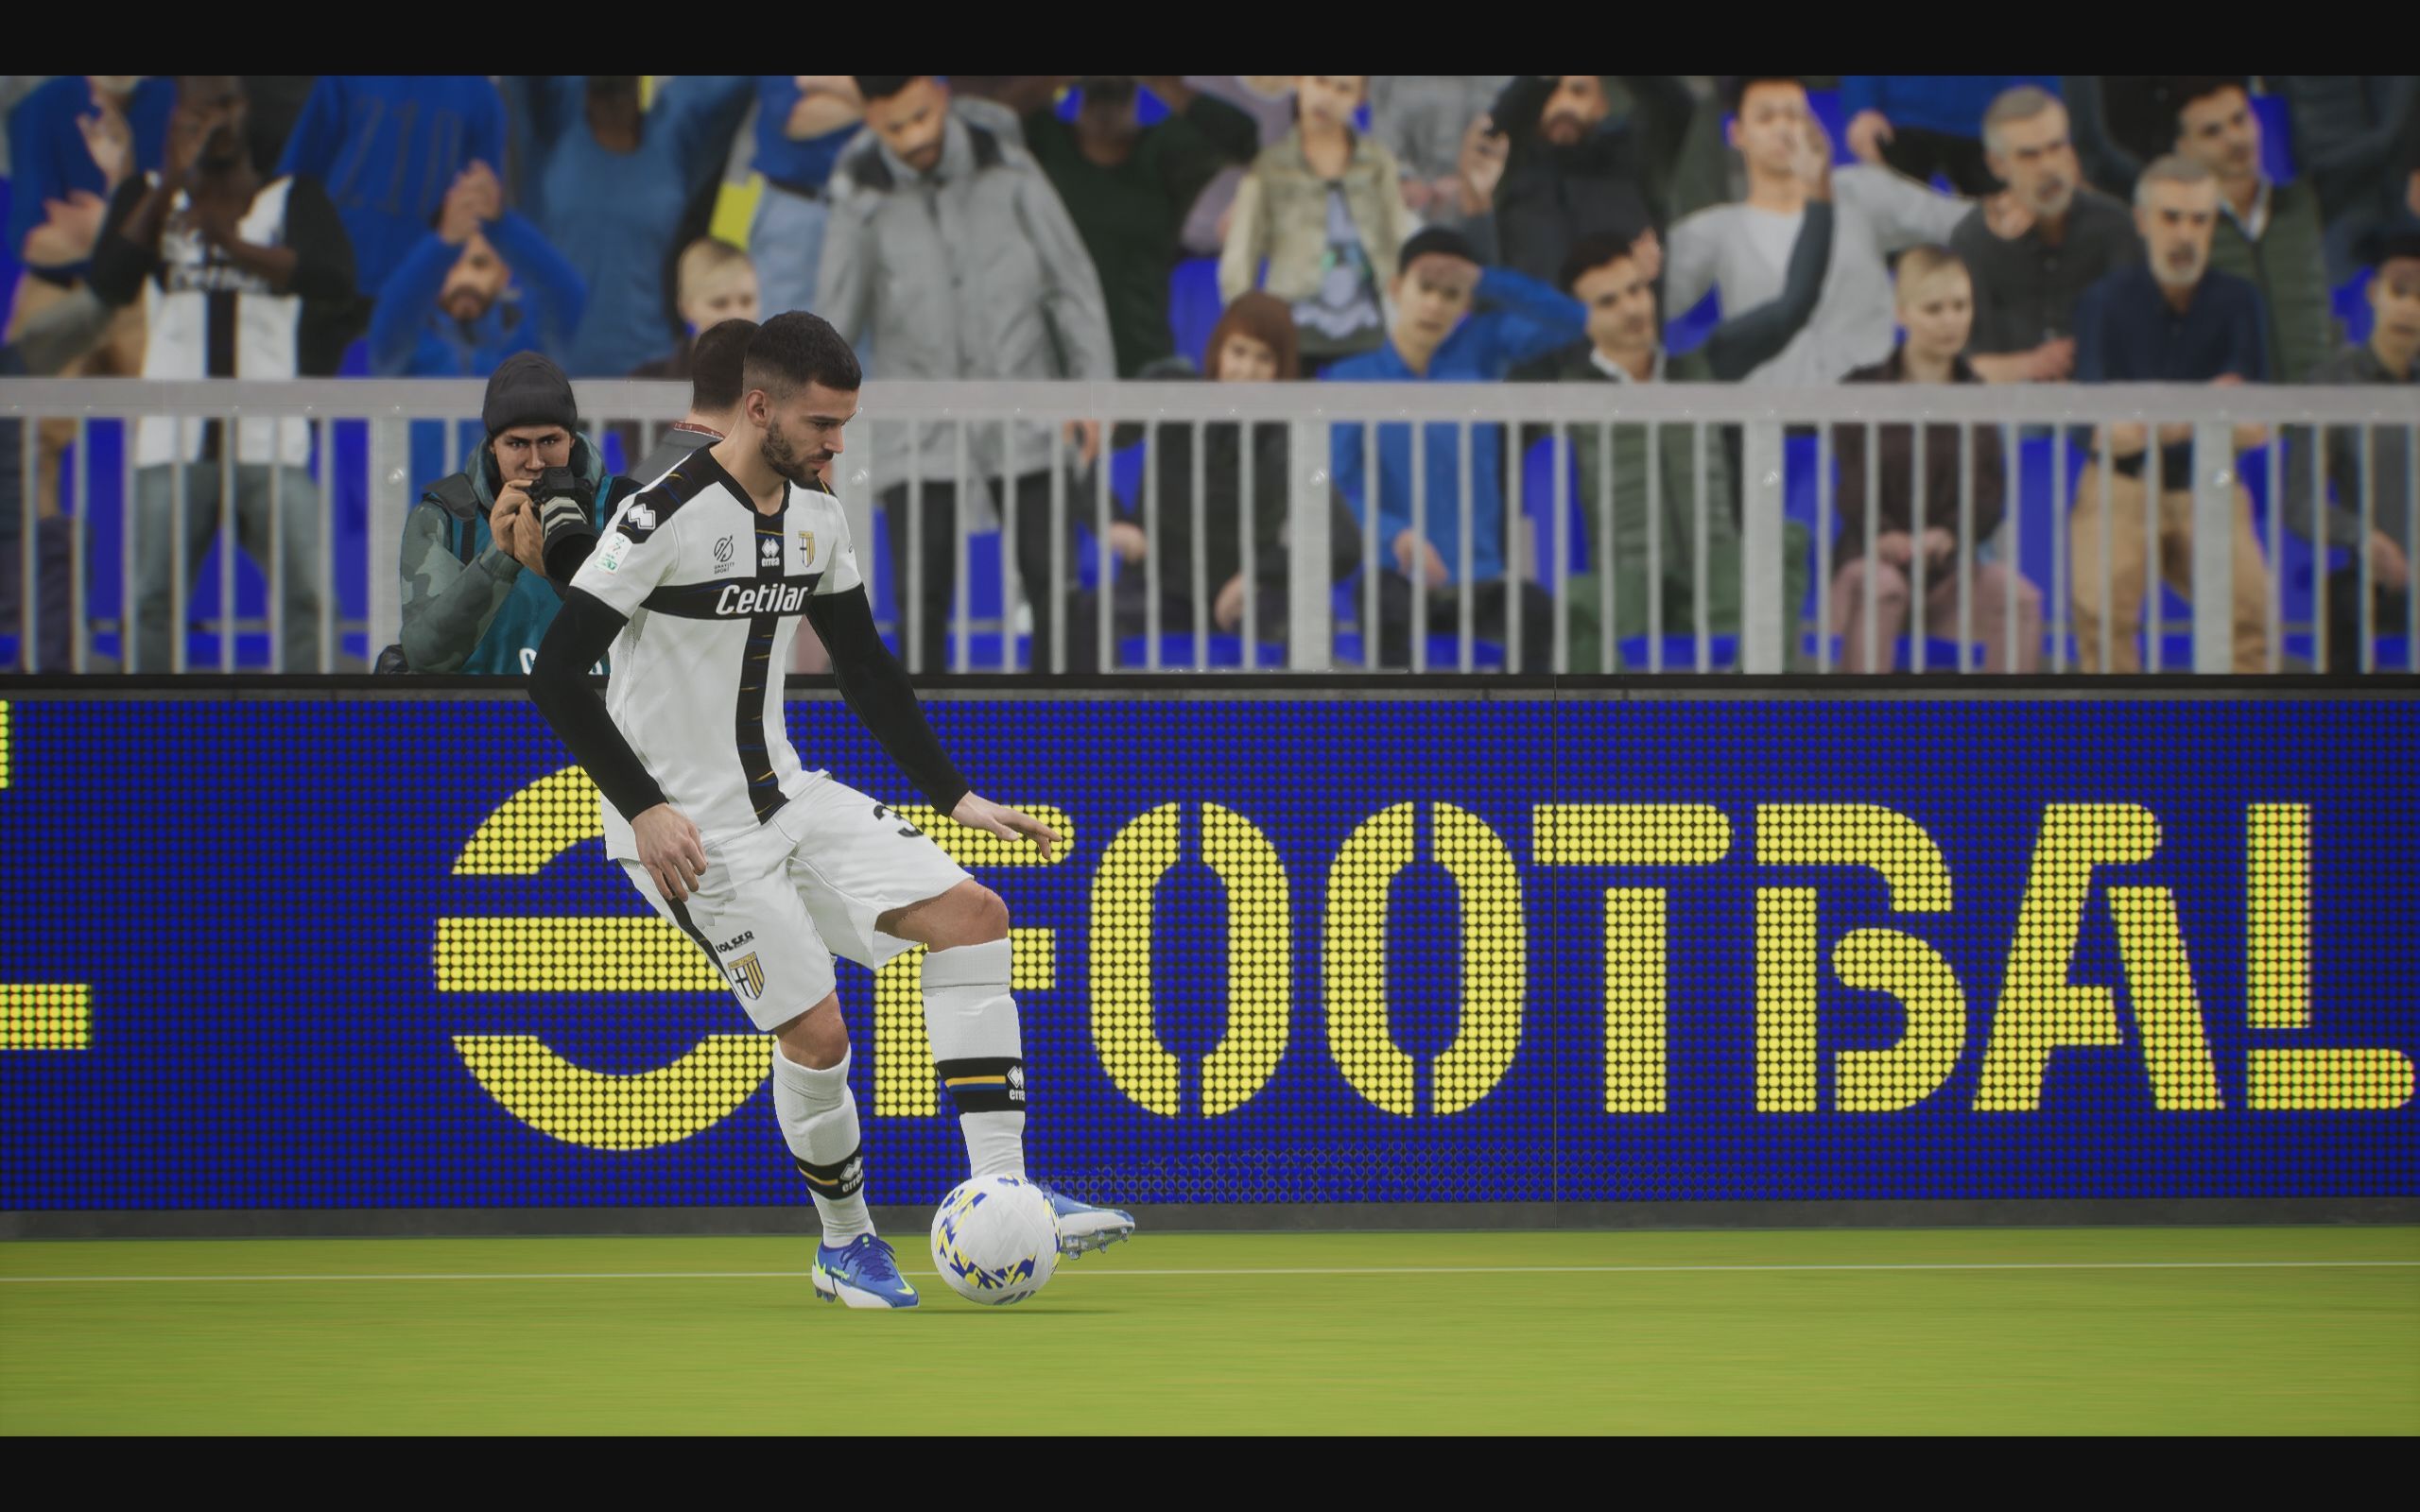 eFootball review: A player in Parma's black and white home kit passes the ball from a cinematic, sideways angle.